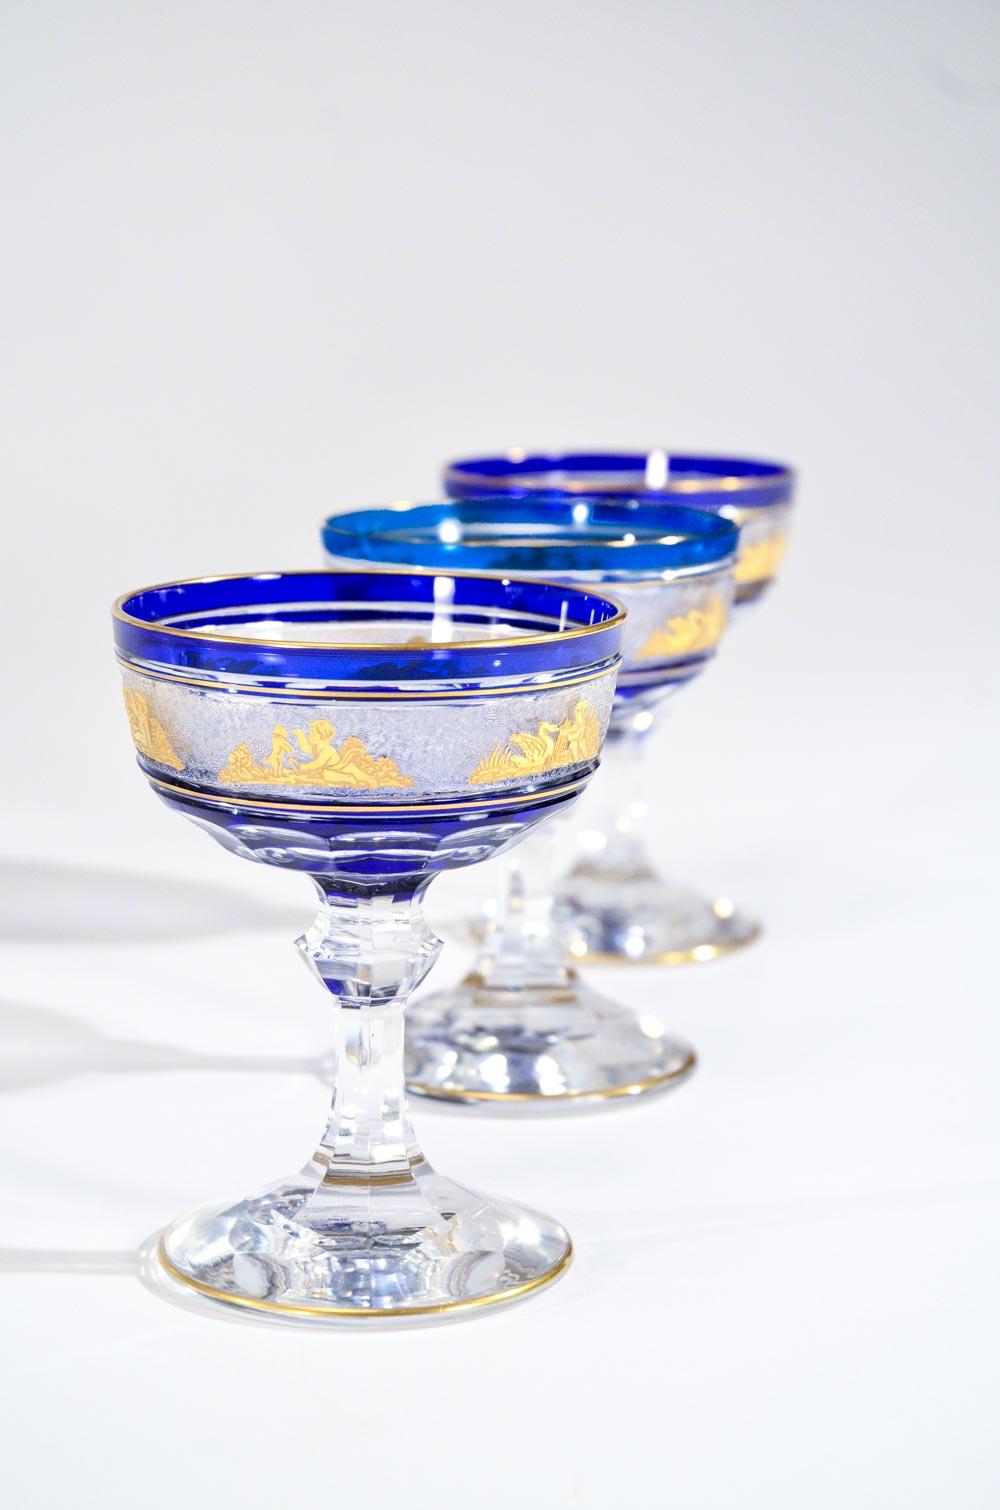 Set 12 Val Saint Lambert Cobalt Cut to Clear Gilt Goblets Champagne or Martinis For Sale 1